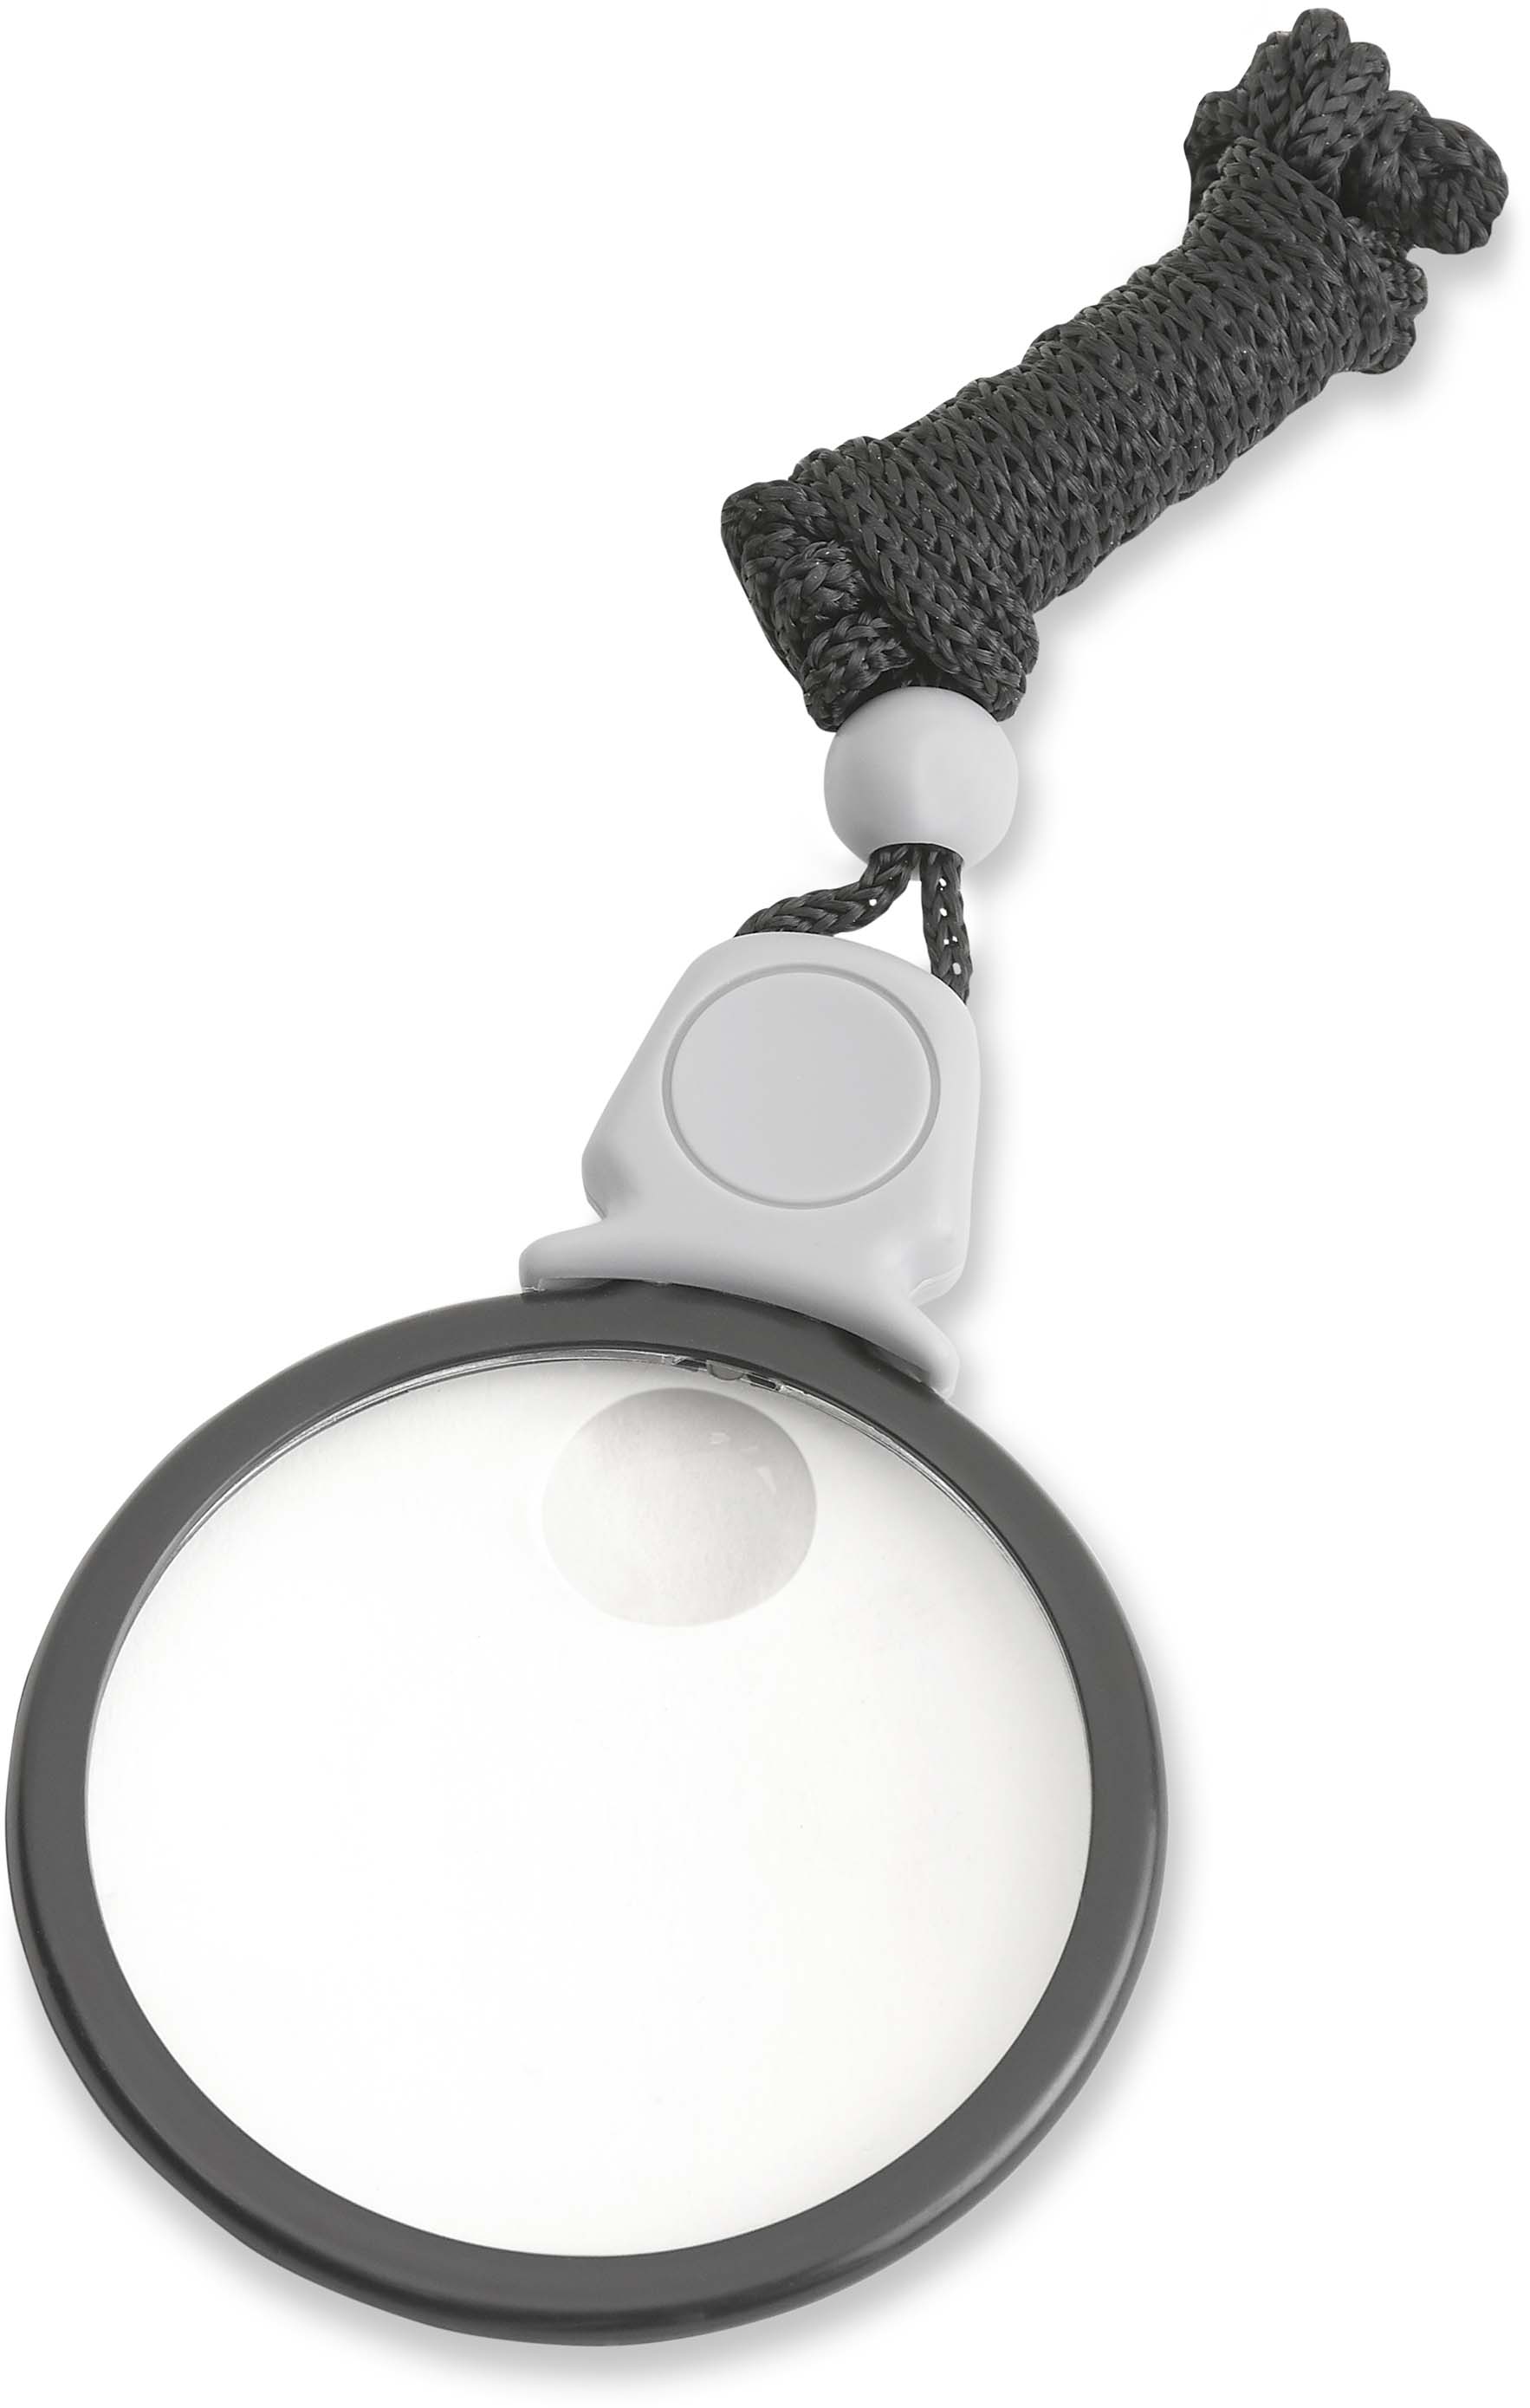 Carson OcuLens 5x/7x magnifying attachment for spectacles